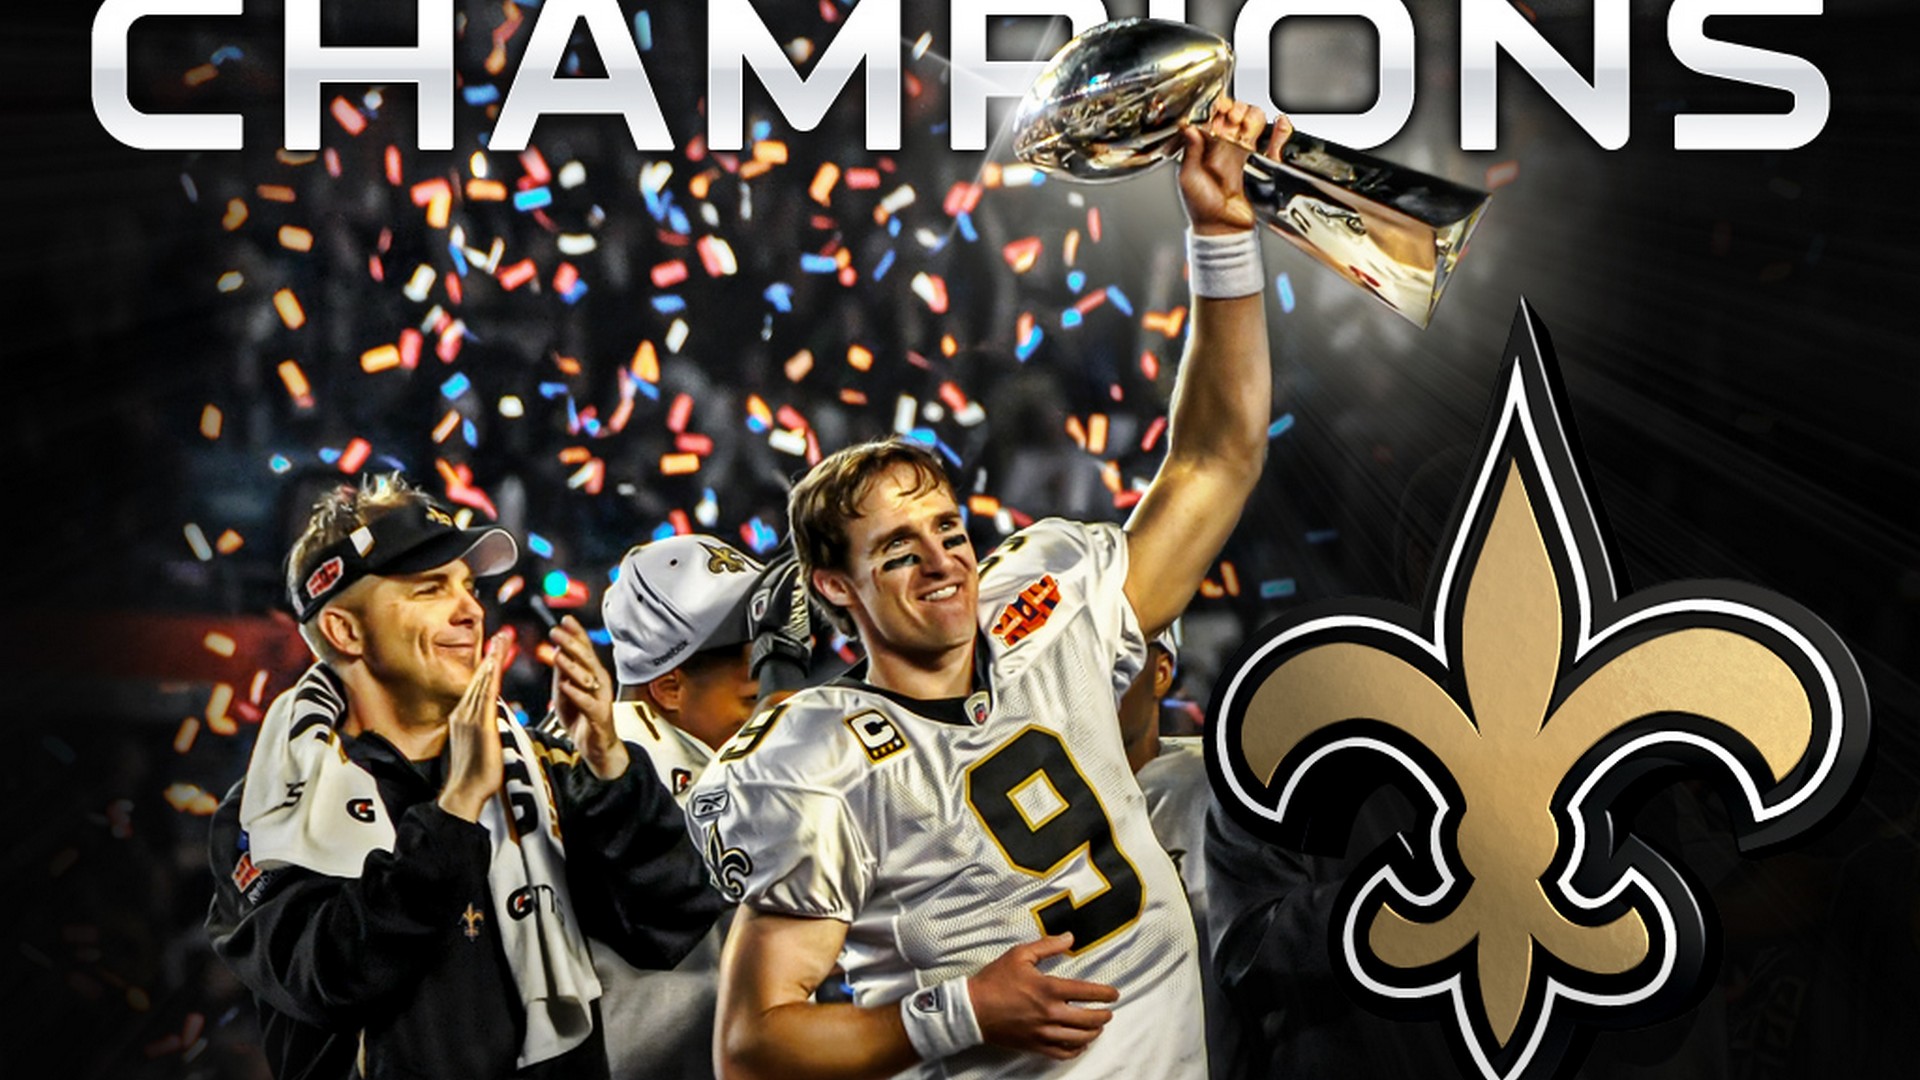 Wallpapers New Orleans Saints NFL with resolution 1920x1080 pixel. You can make this wallpaper for your Mac or Windows Desktop Background, iPhone, Android or Tablet and another Smartphone device